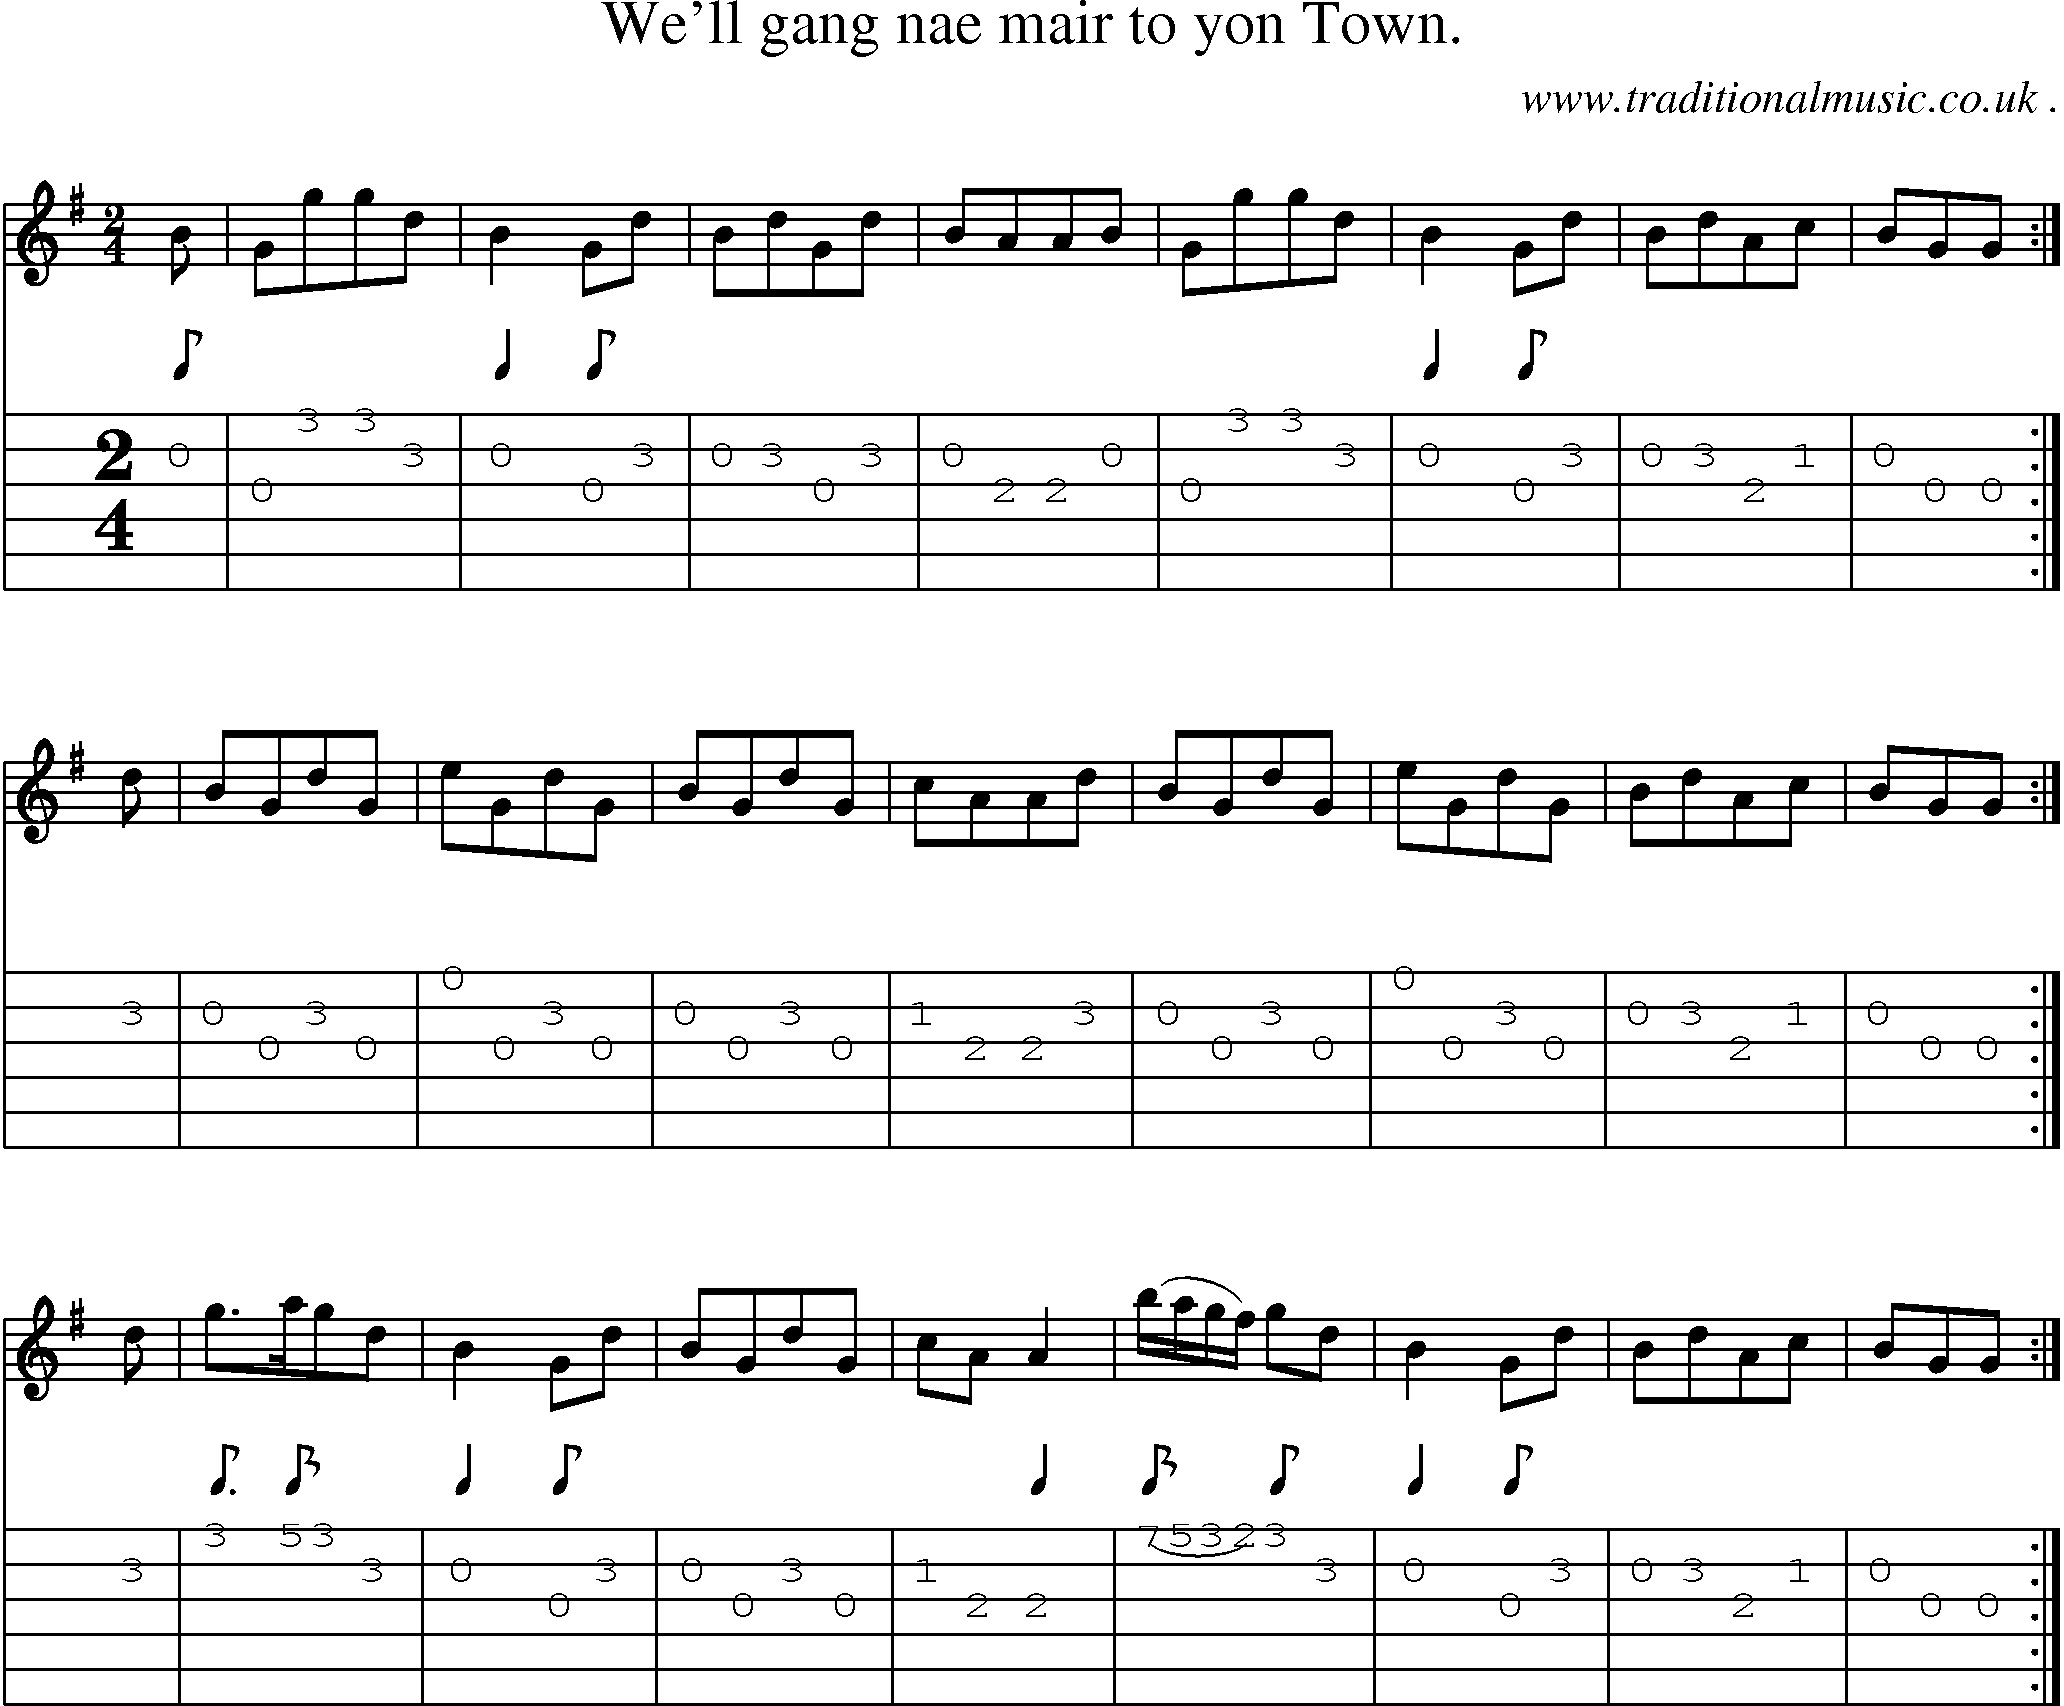 Sheet-Music and Guitar Tabs for Well Gang Nae Mair To Yon Town